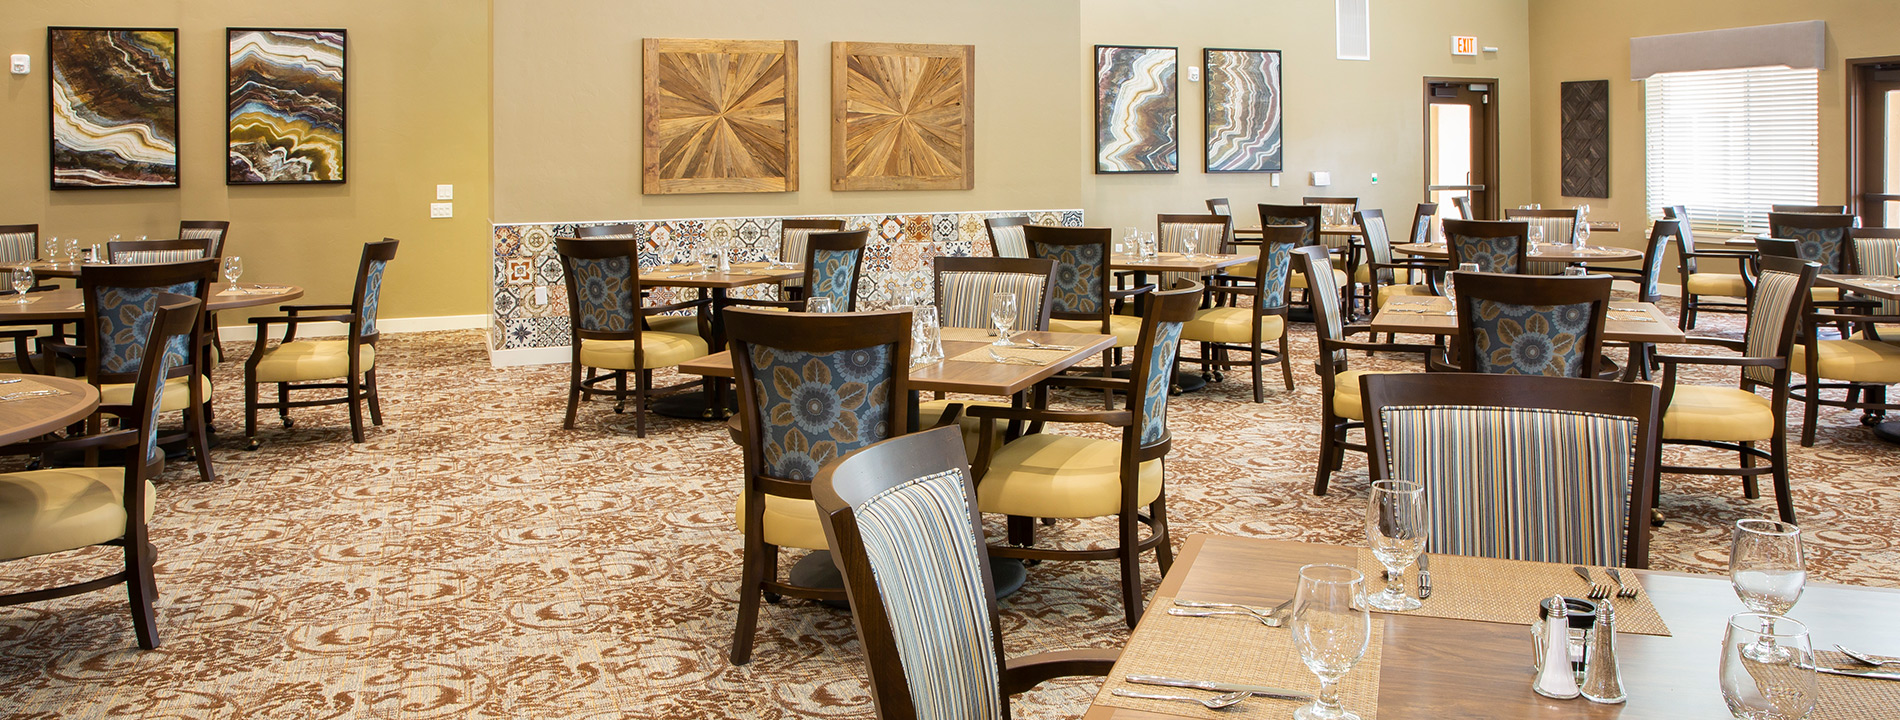 A dining area at The Watermark at Continental Ranch.